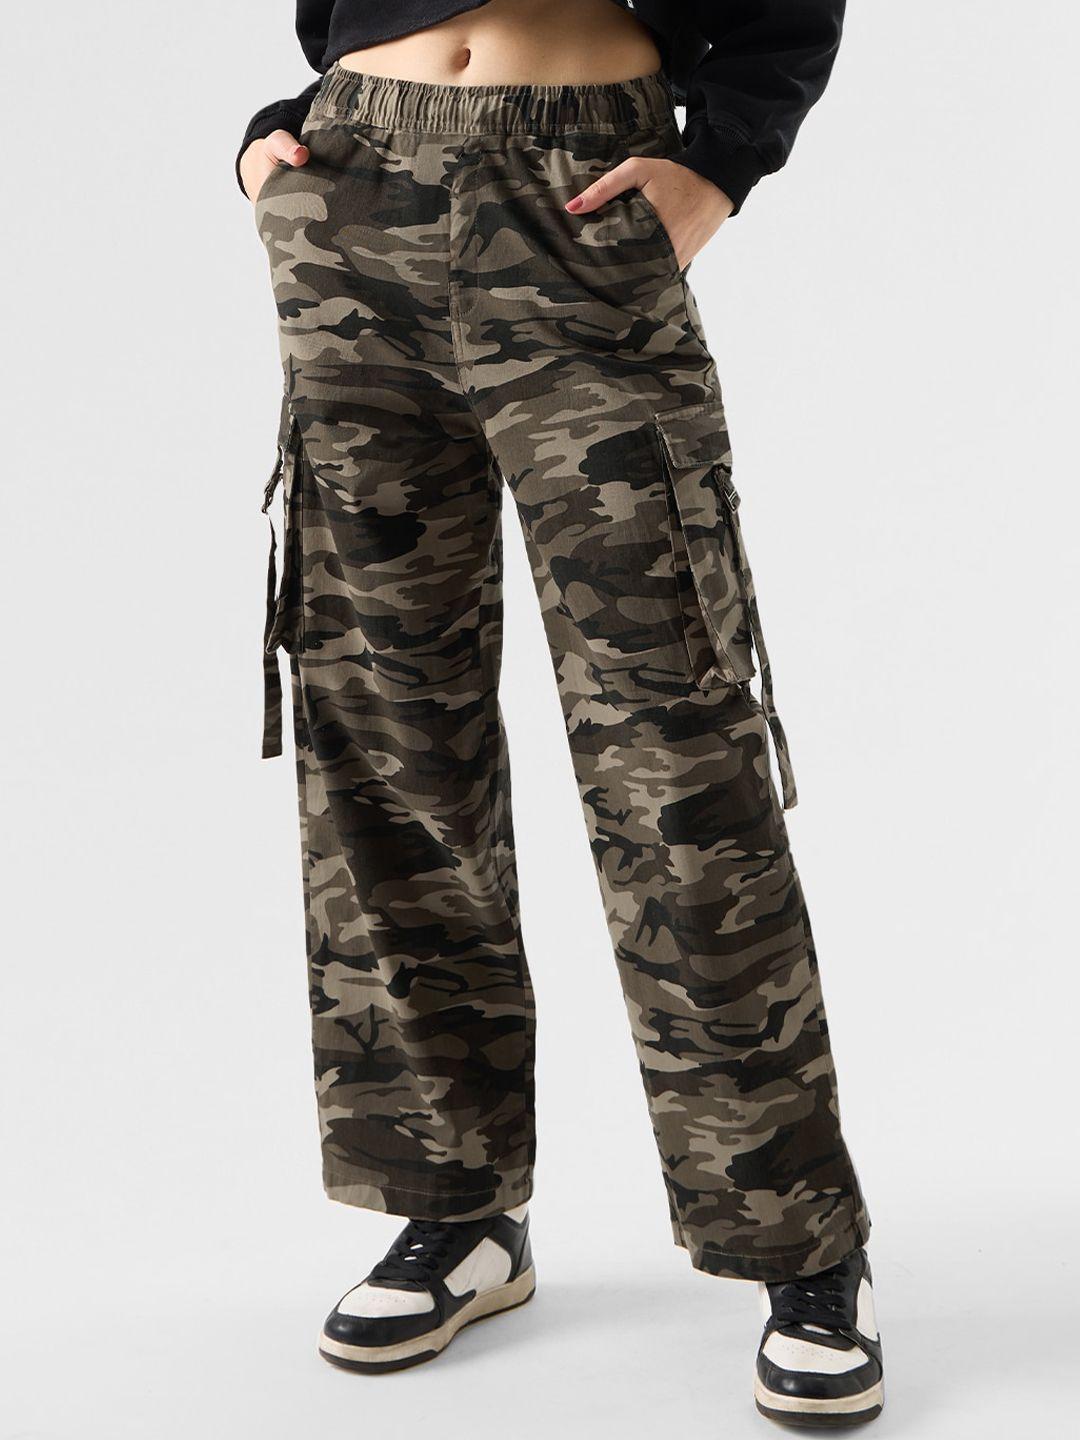 the souled store women camouflage cotton relaxed fit track pants